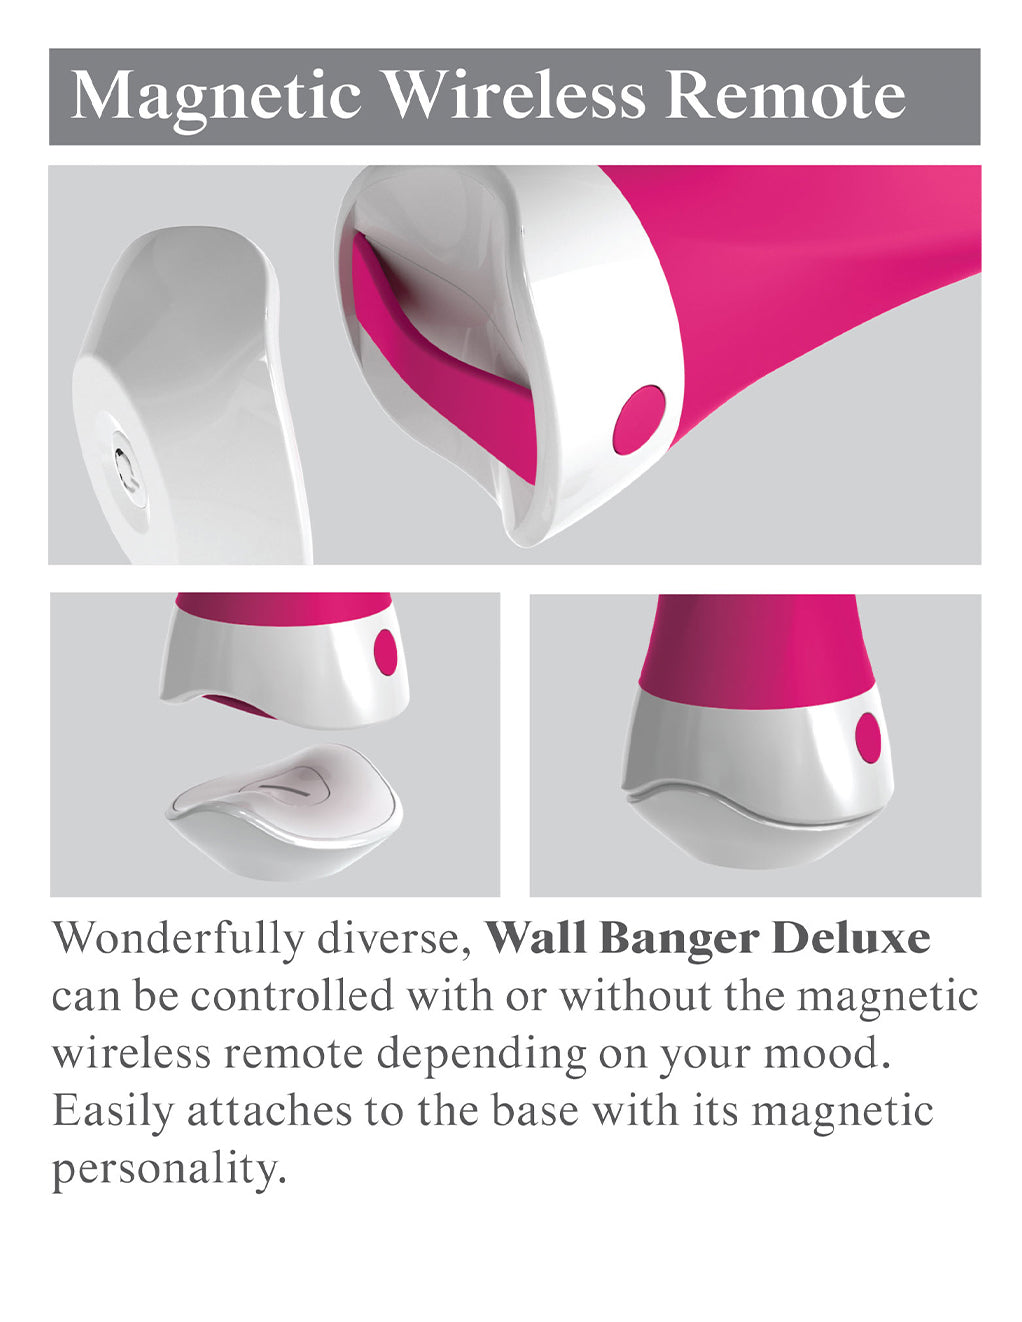 3Some Wall Banger Deluxe- Magnetic Remote Diagram